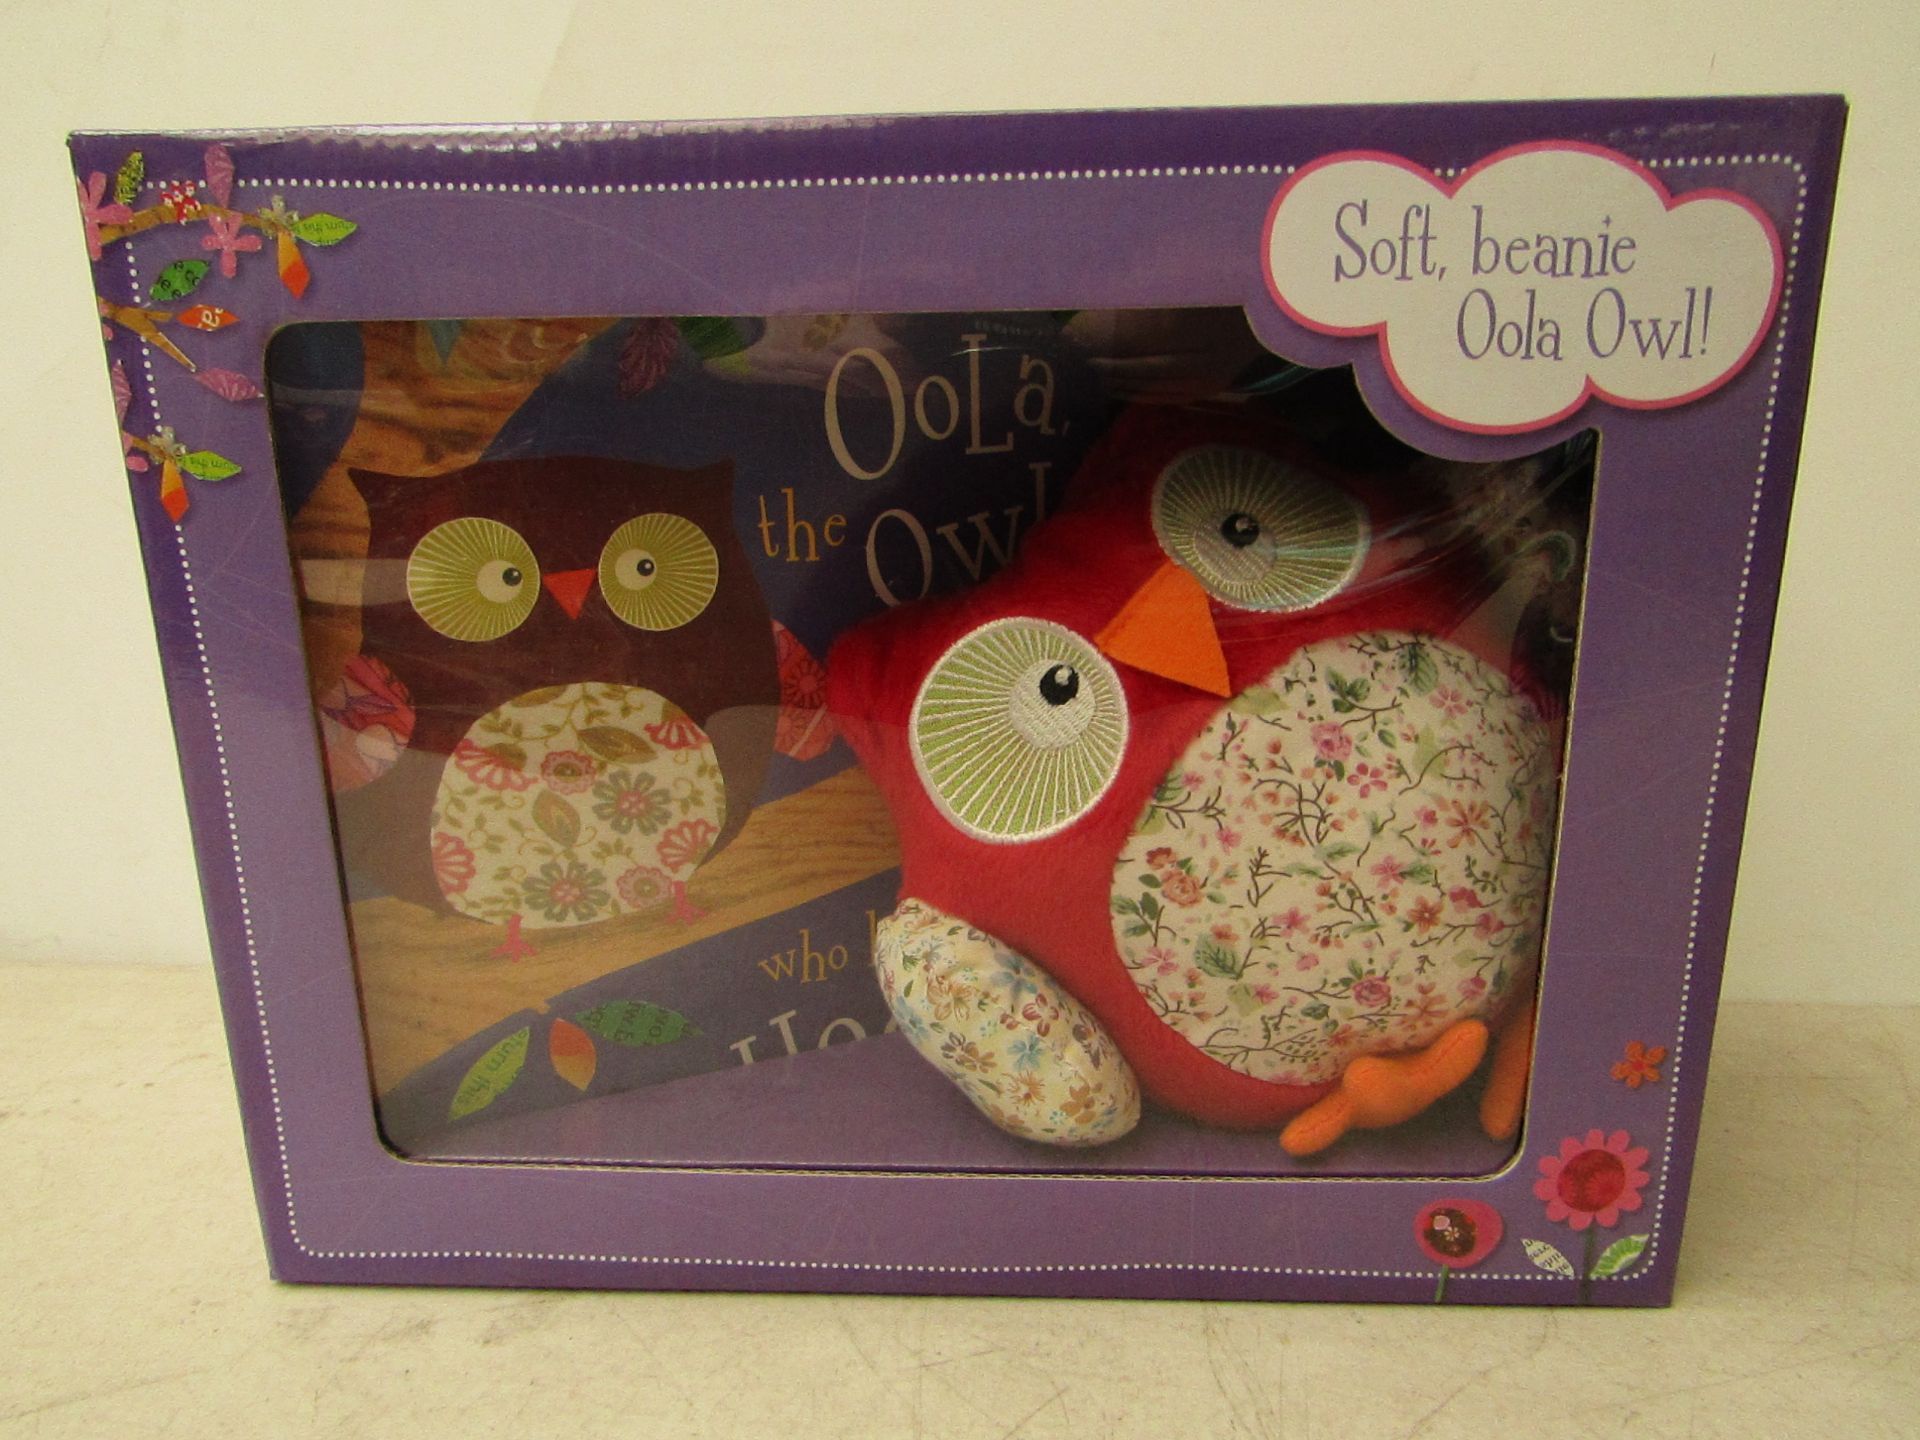 Soft beanie oola owl toy and book set, new and boxed.